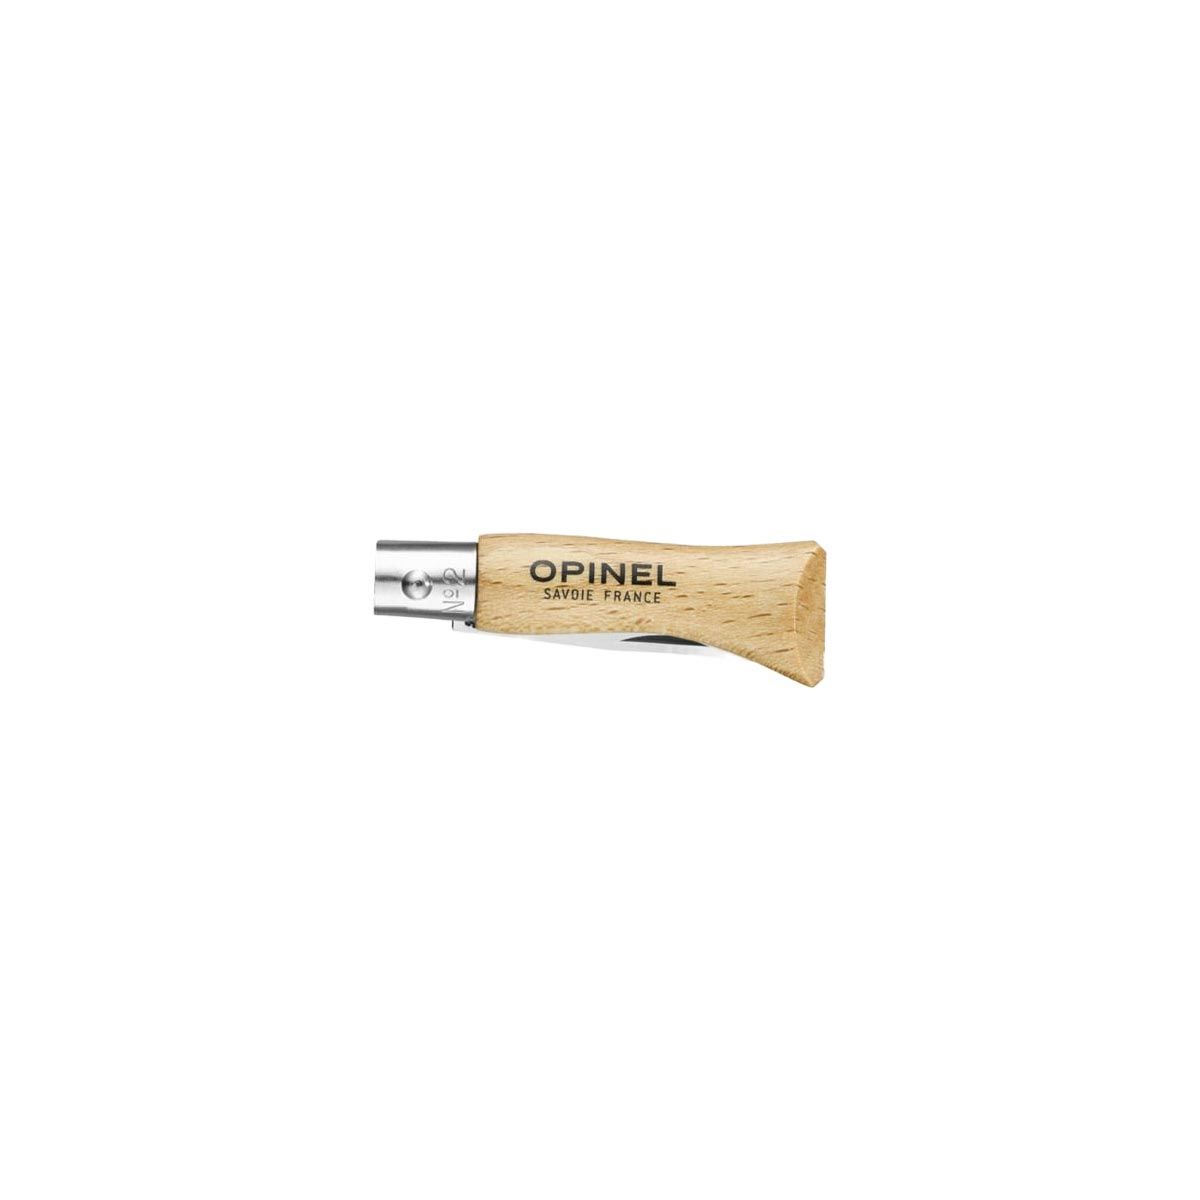 Couteau Opinel N°2 - Tradition 3,5 cm - Inox, hêtre